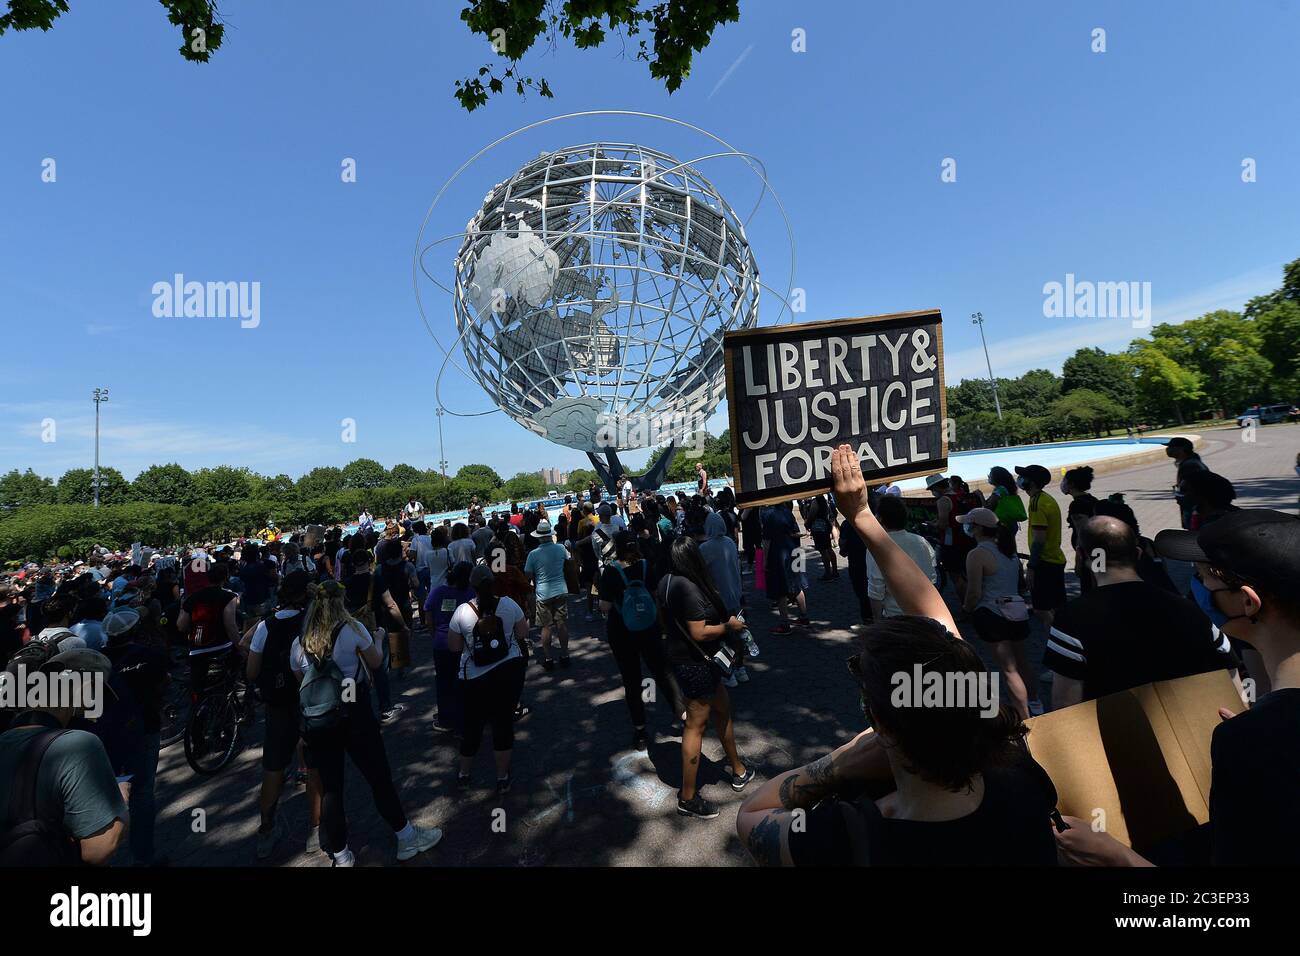 A marcher holds a sign up at a Juneteenth celebration rally held in front of the Unisphere in Flushing Meadows-Corona Park in the borough of Queens, New York, June 19, 2020. Juneteenth is celebrated as a commemoration of the ending of slavery in the United States.   given on January 1, 1983, which was not enforced in Texas due to a lac Credit: Sipa USA/Alamy Live News Stock Photo